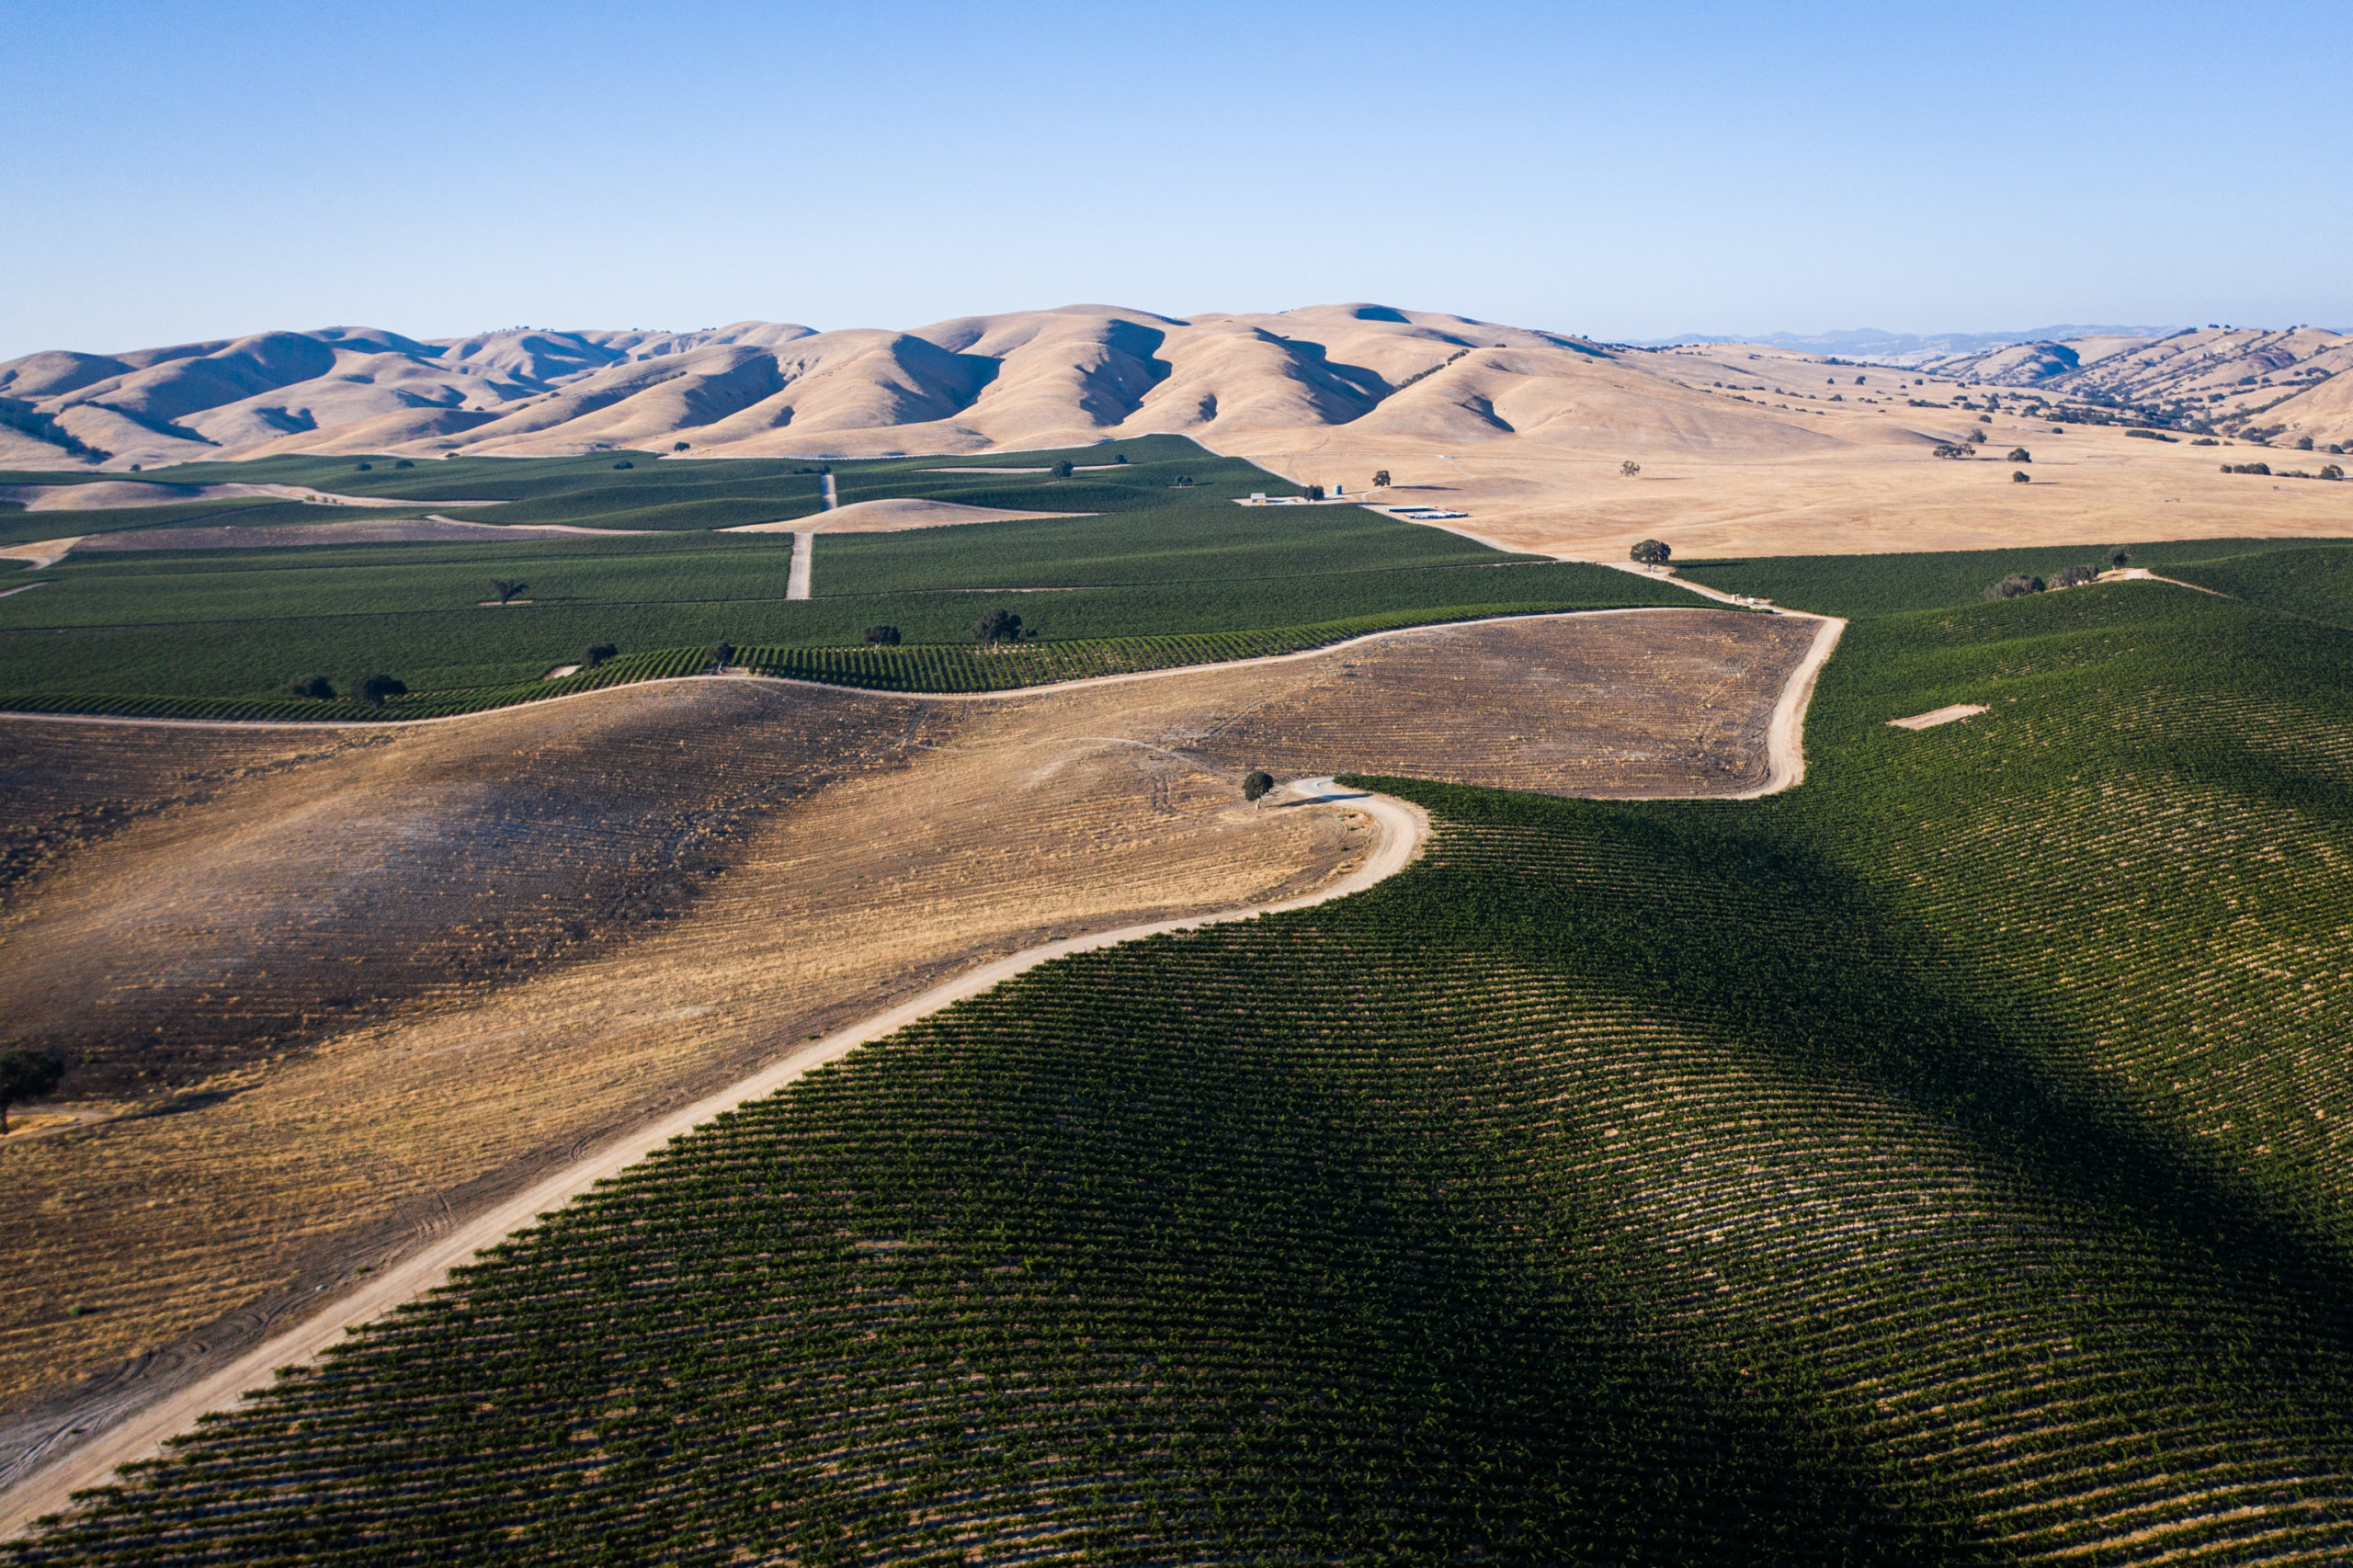 Aerial view of grape vines growing in Paso Robles, California